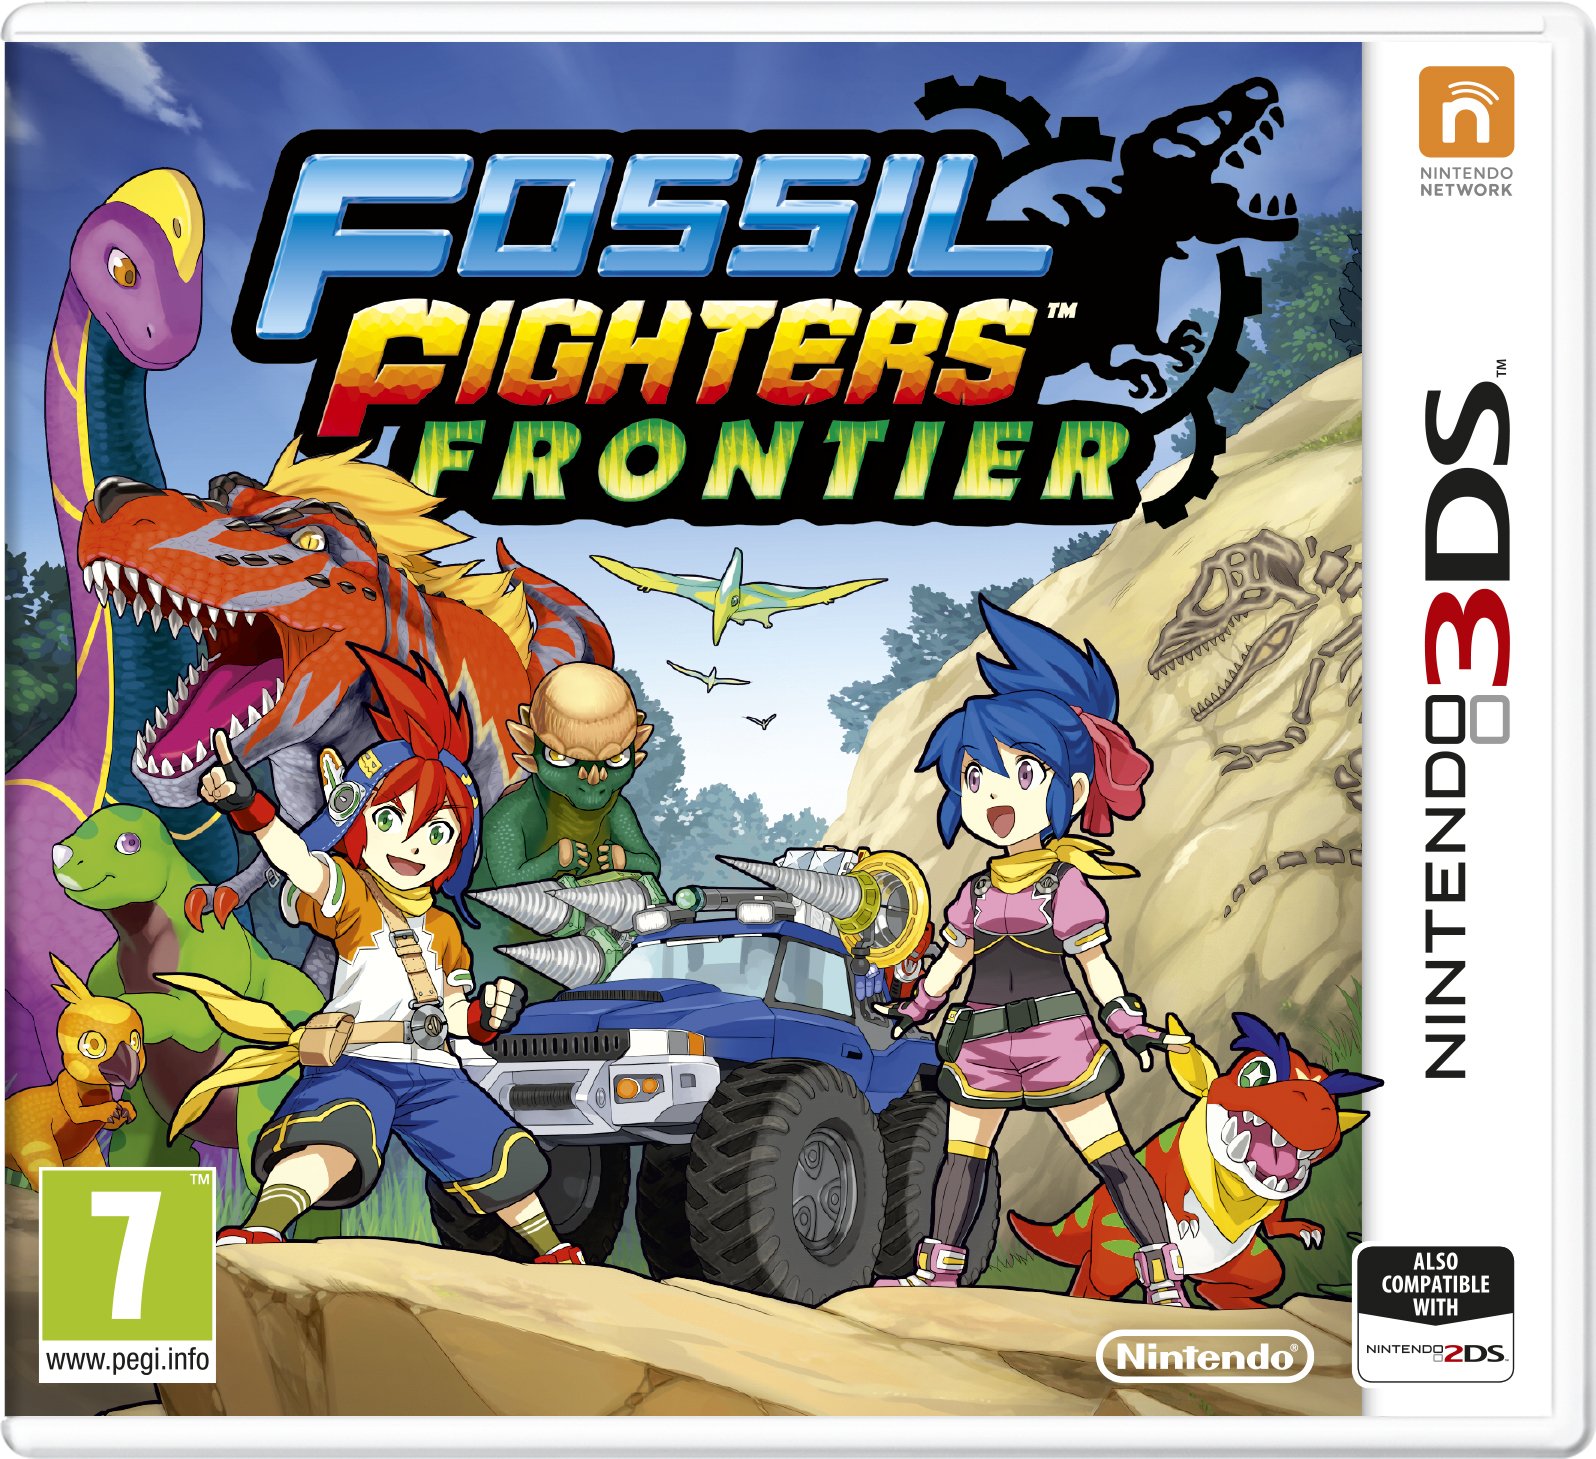 Fossil fighters tarbo